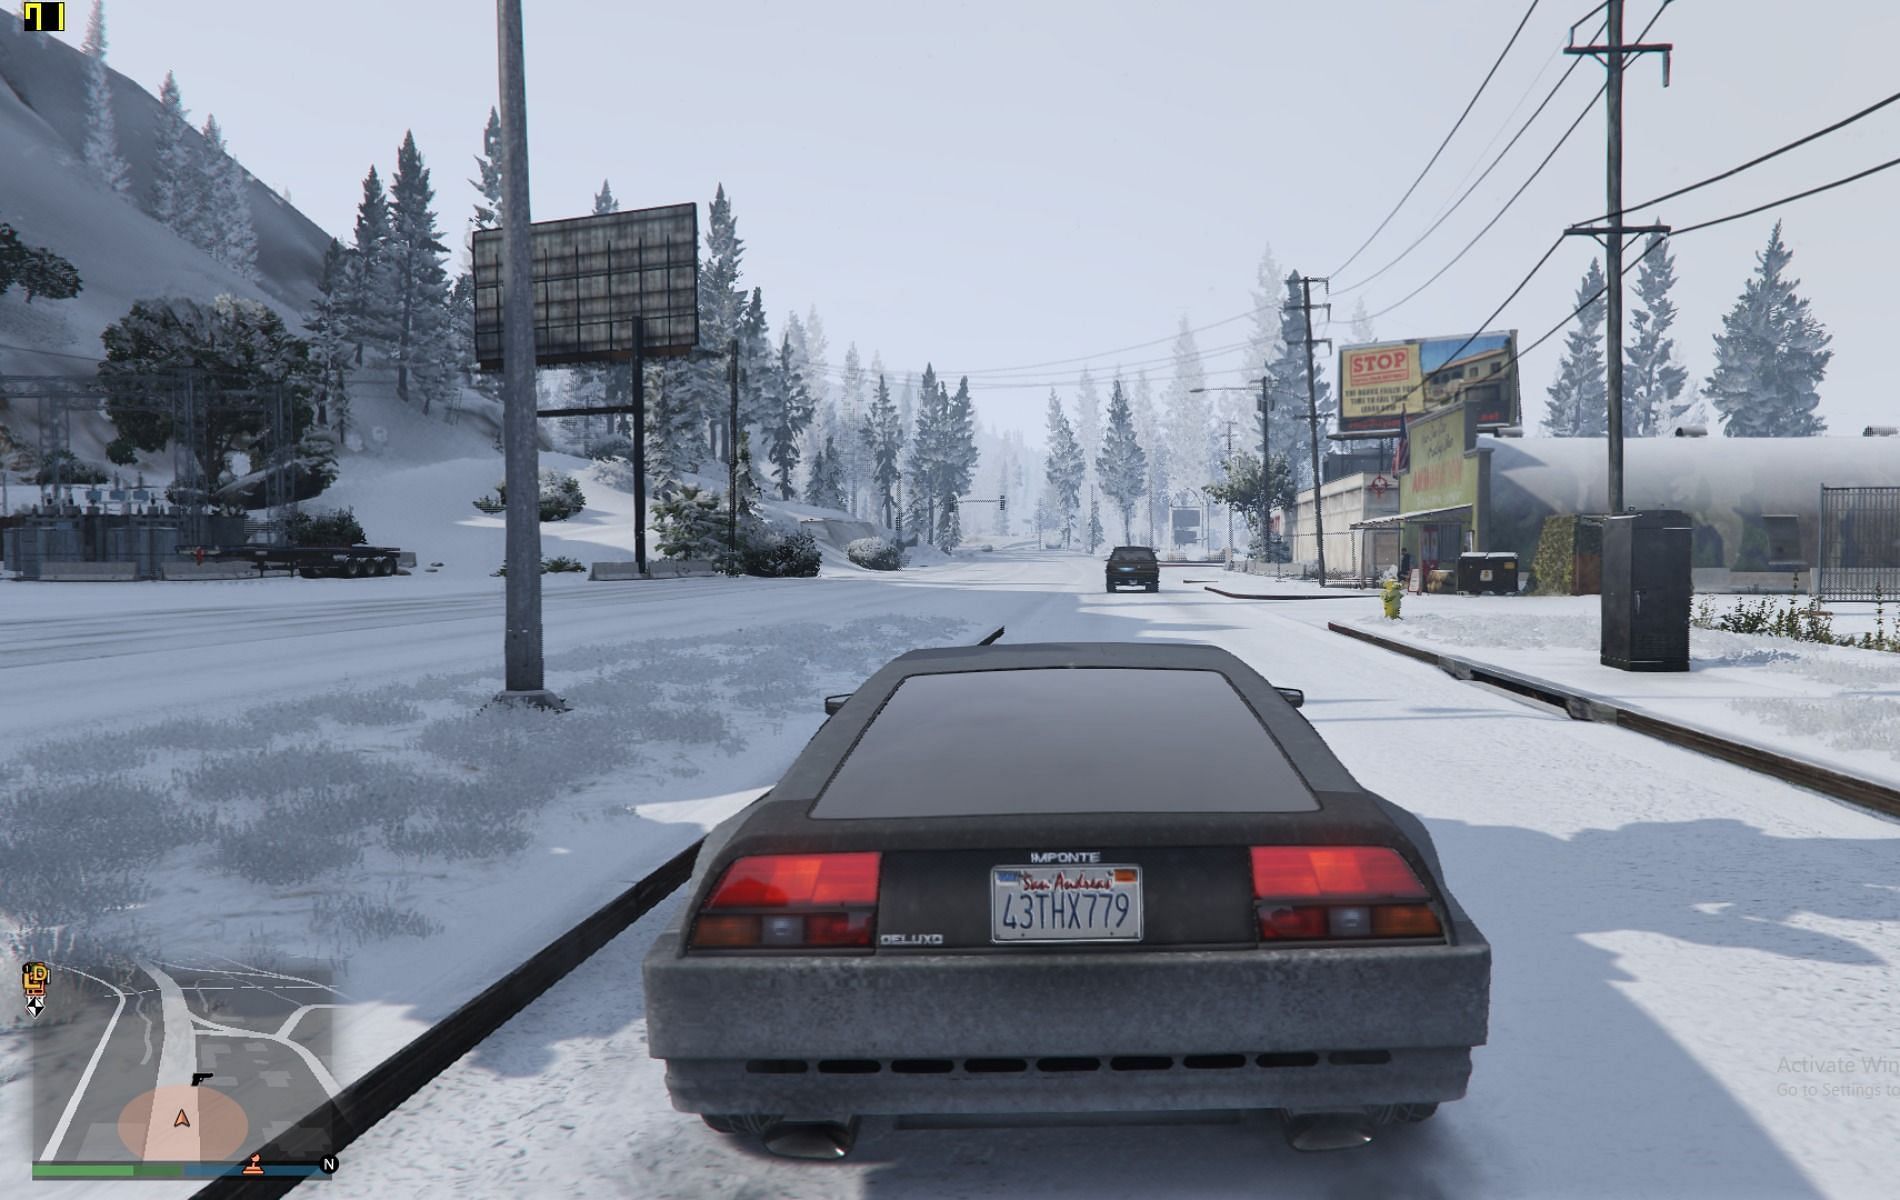 When is snow expected to come to GTA Online this year?